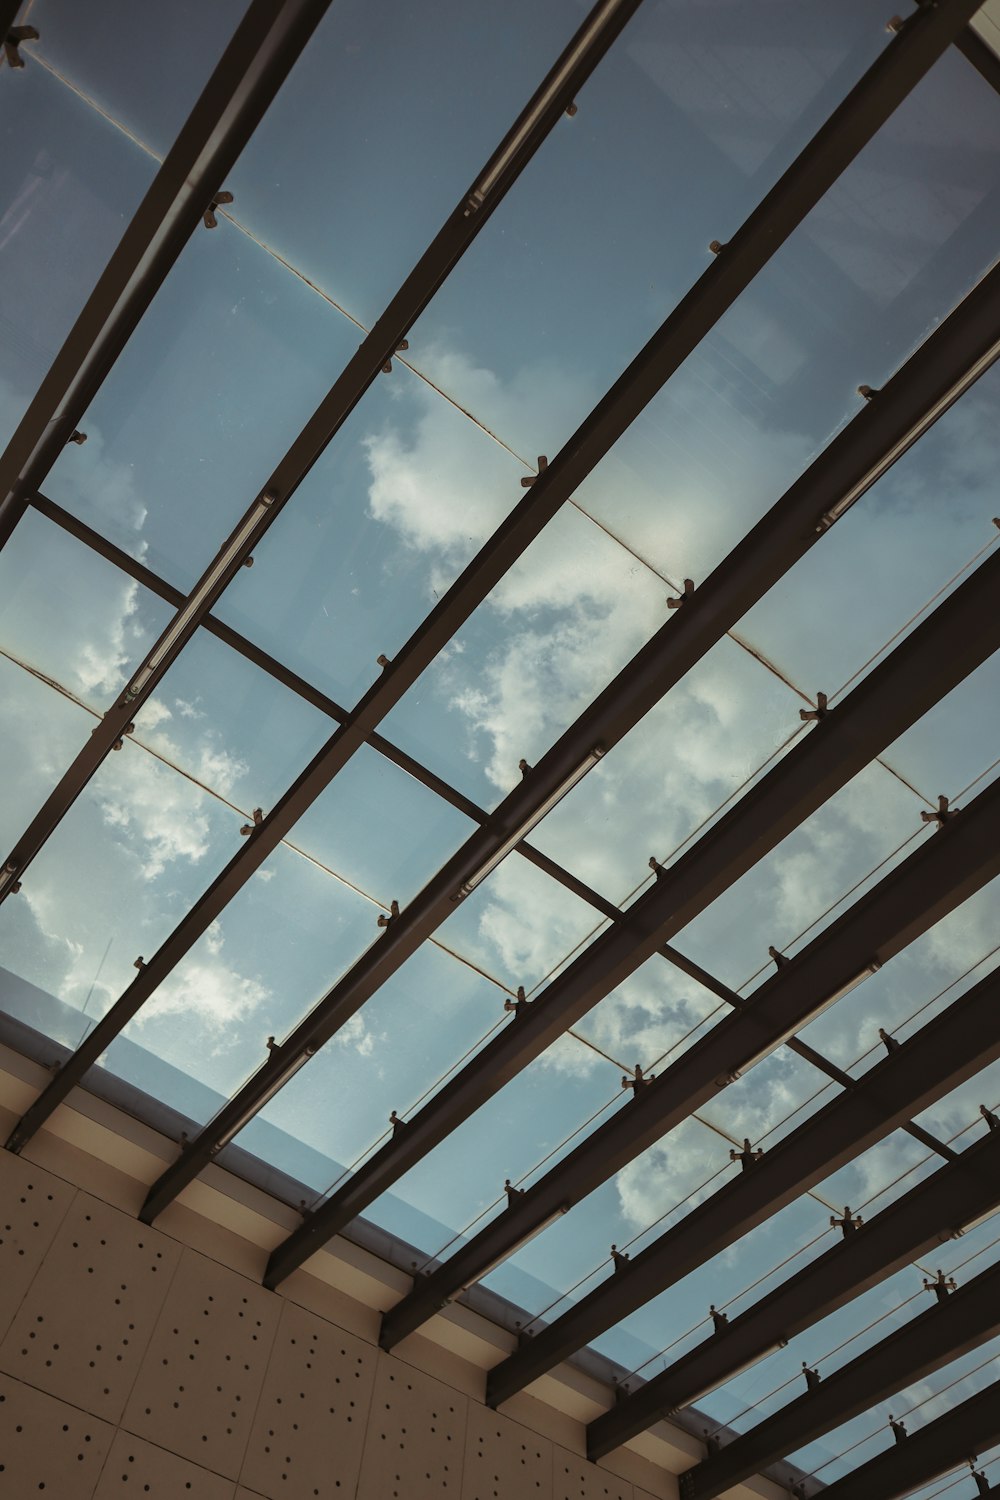 a view of the sky through a glass roof